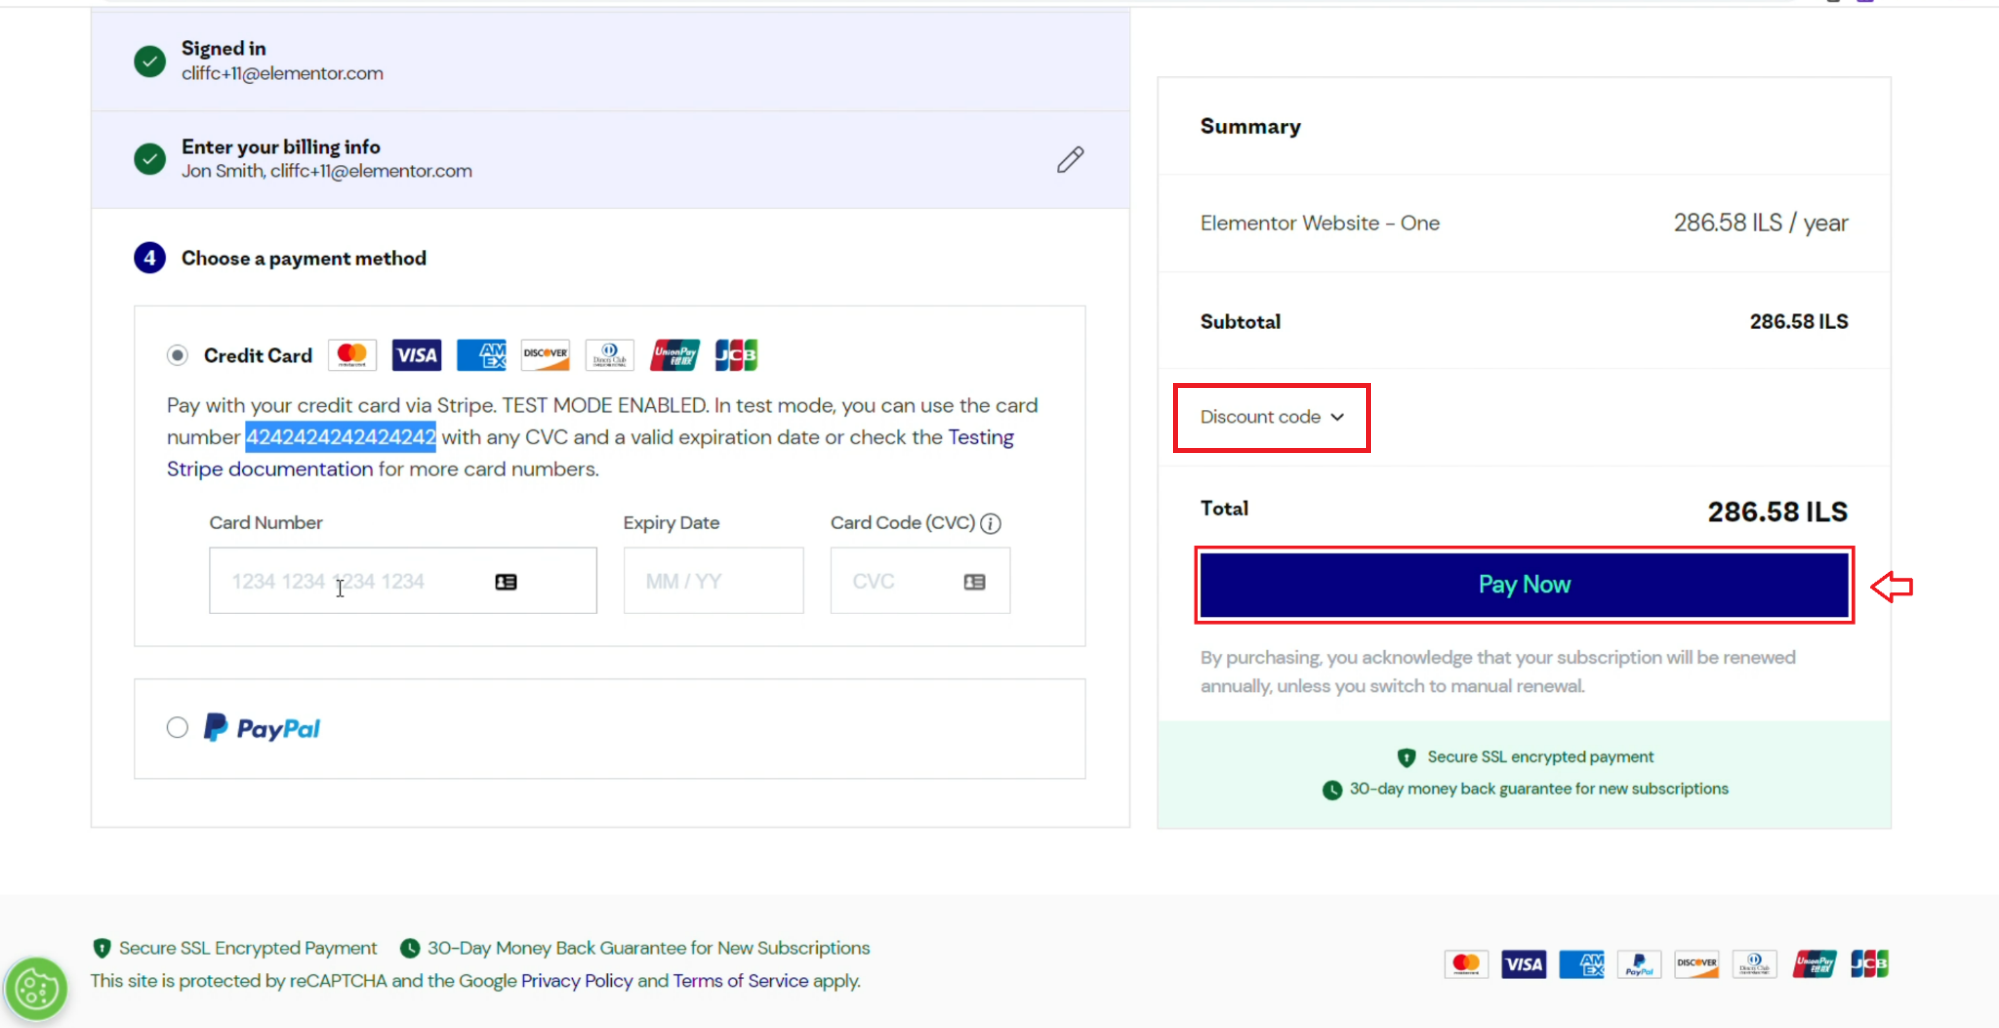 Screenshot of the last step of the purchase process with the Pay Now button highlighted in red next to a form collecting payment details.